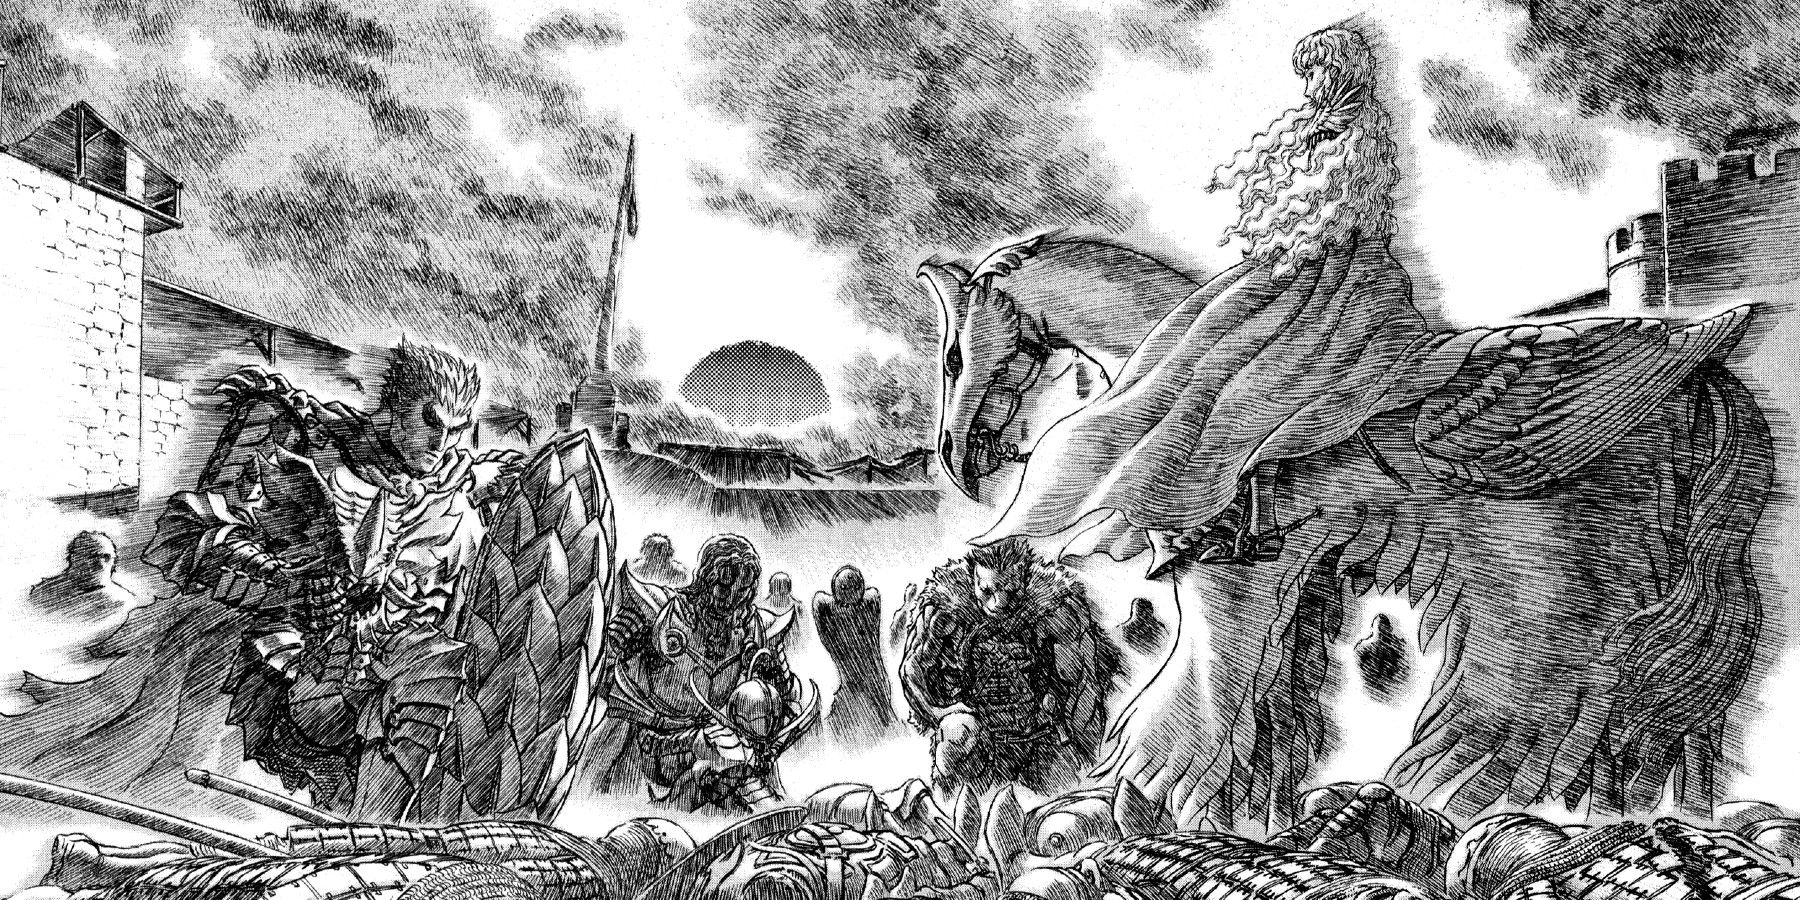 The Reborn Band of the Falcon from Berserk